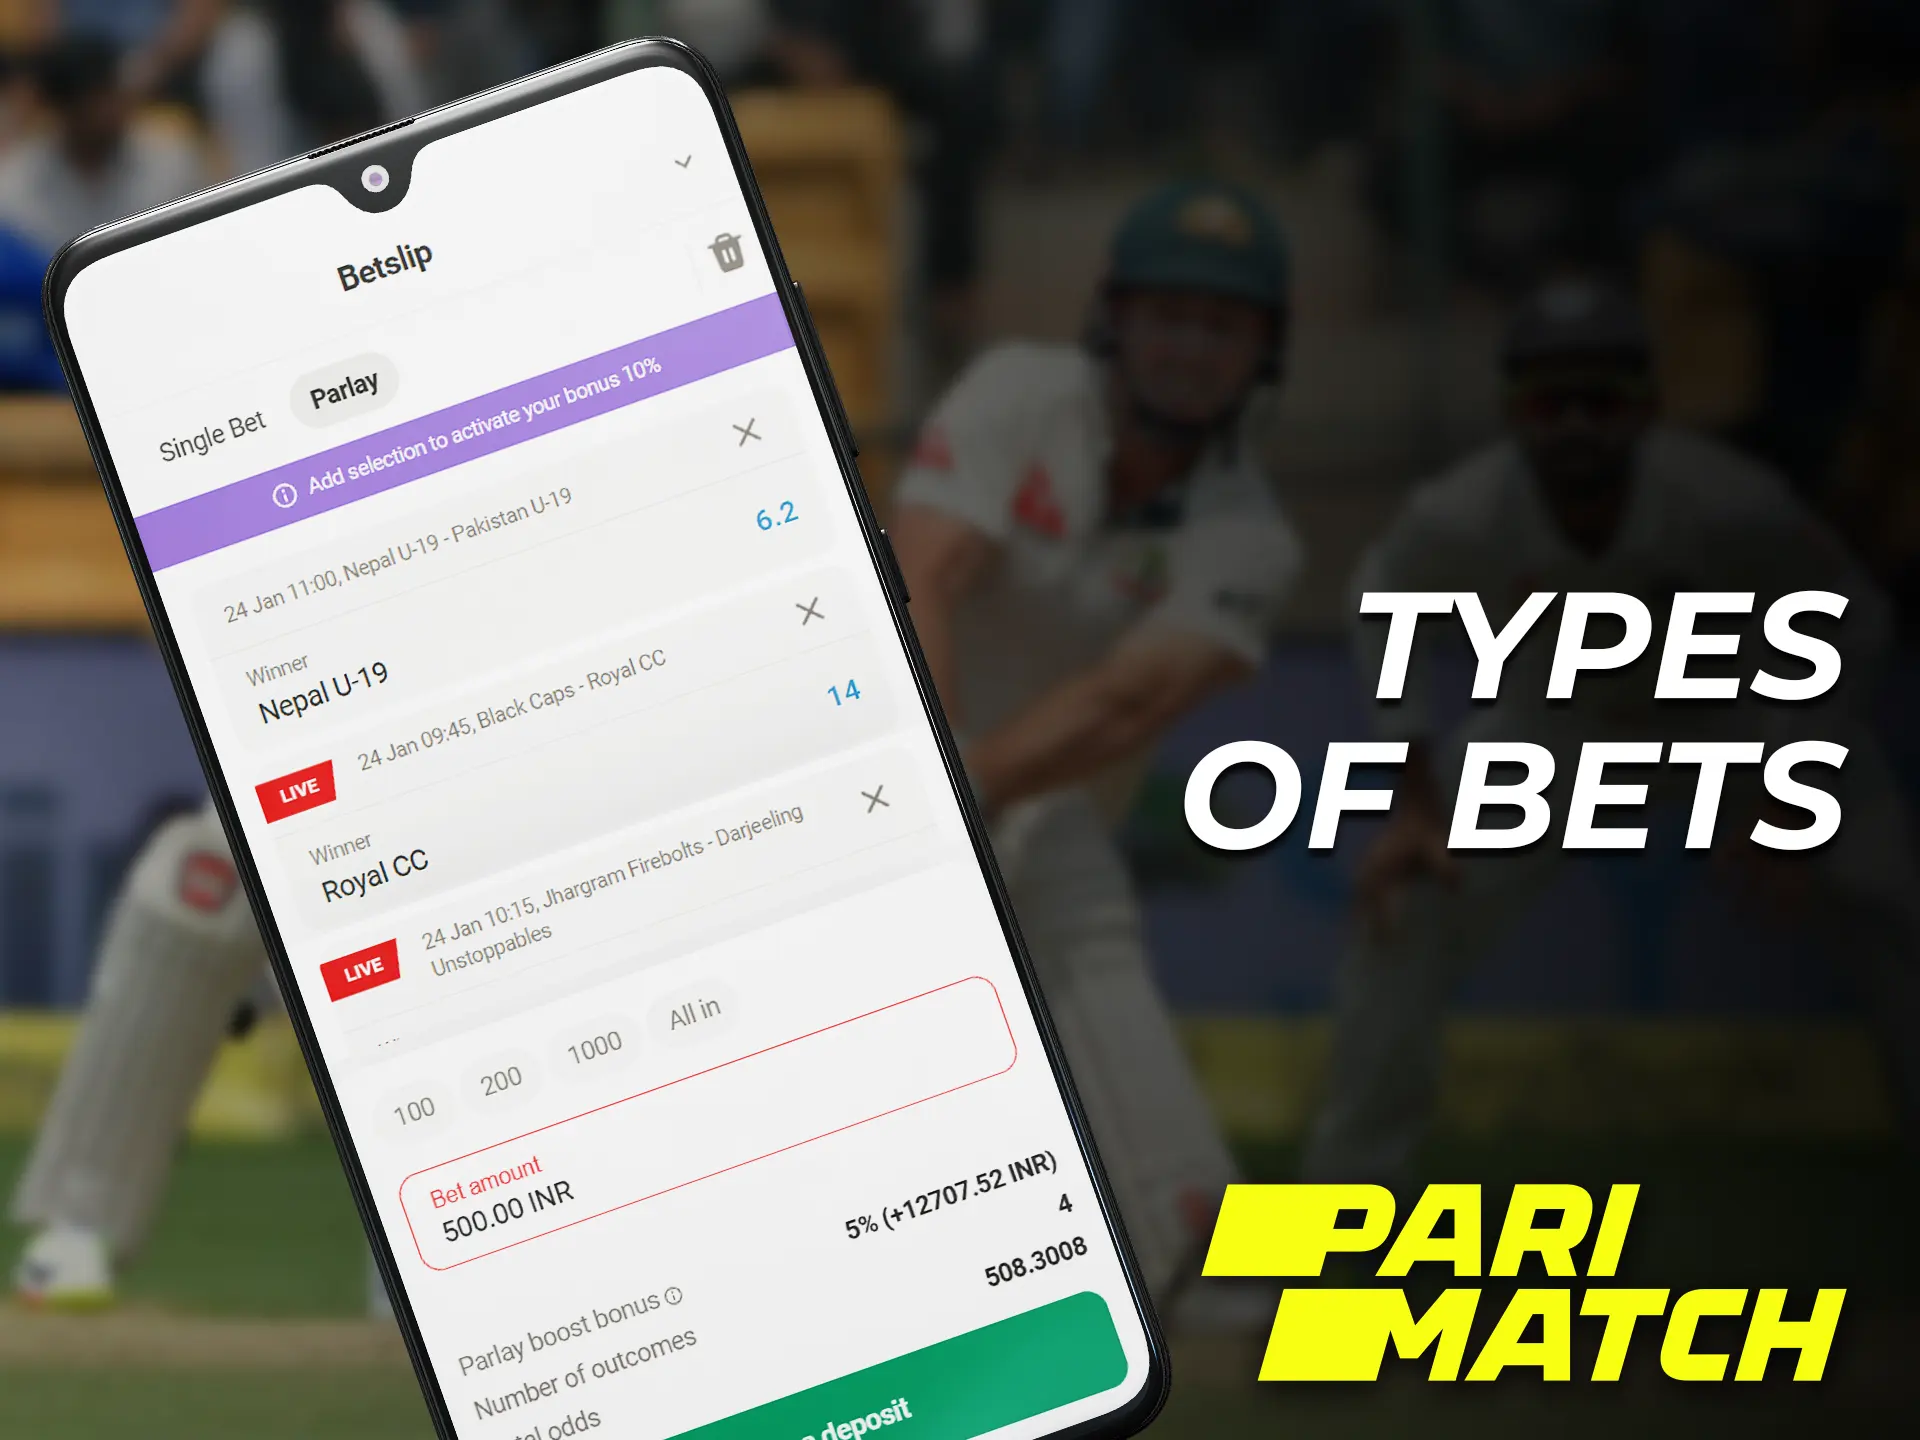 The main types of bets in the Parimatch app.